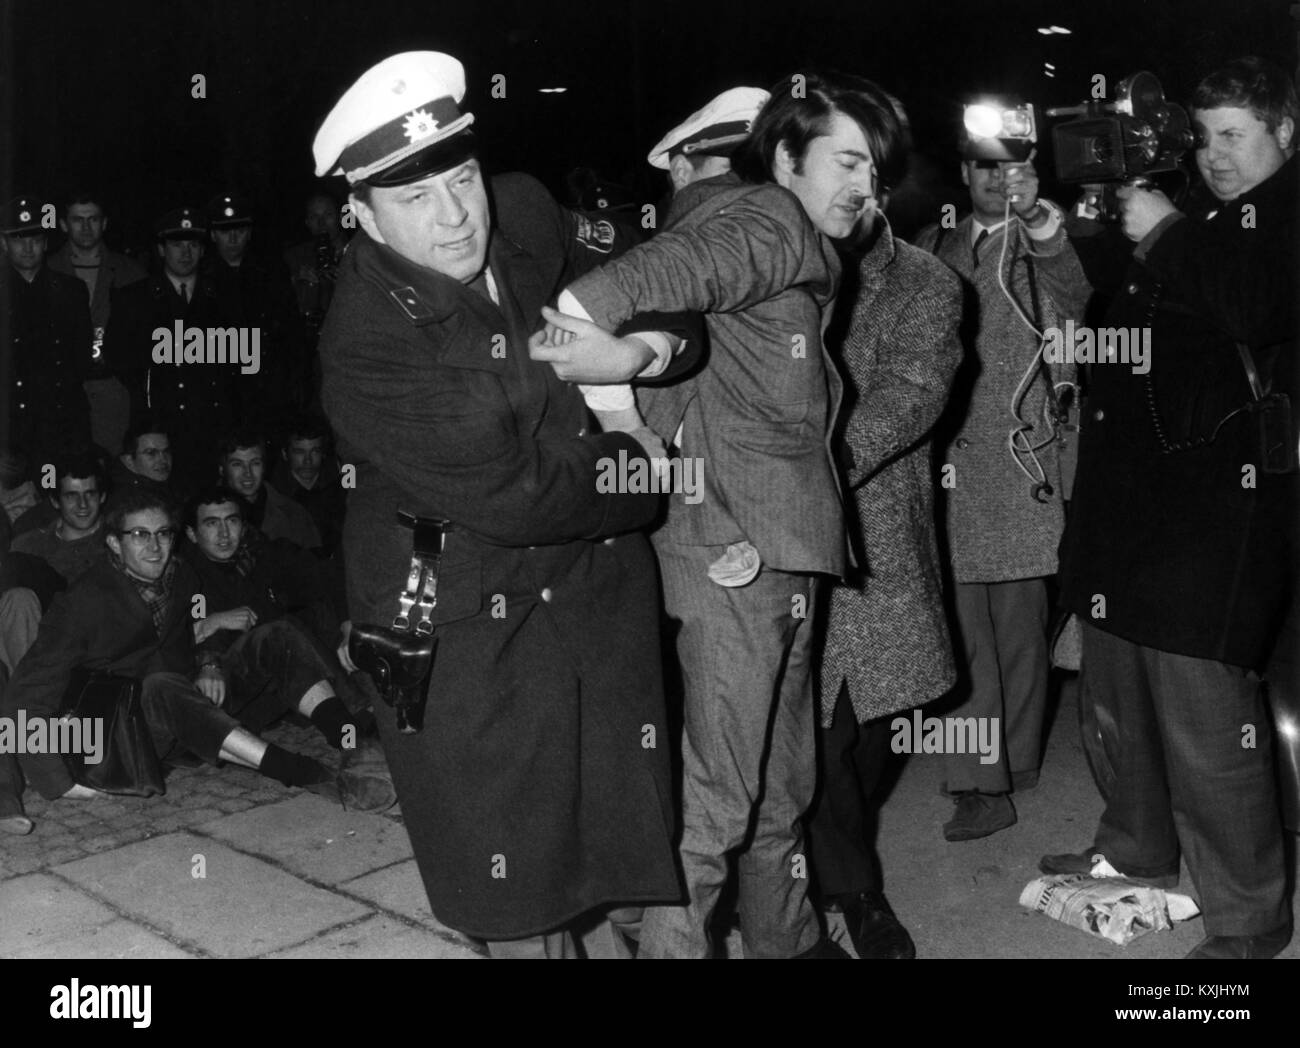 A demonstrant is arrested in front of the America House in Munich on the 8th of February in 1968. There were riots shortly before the opening of an exhibition in the course of protests against Vietnam War. | usage worldwide Stock Photo